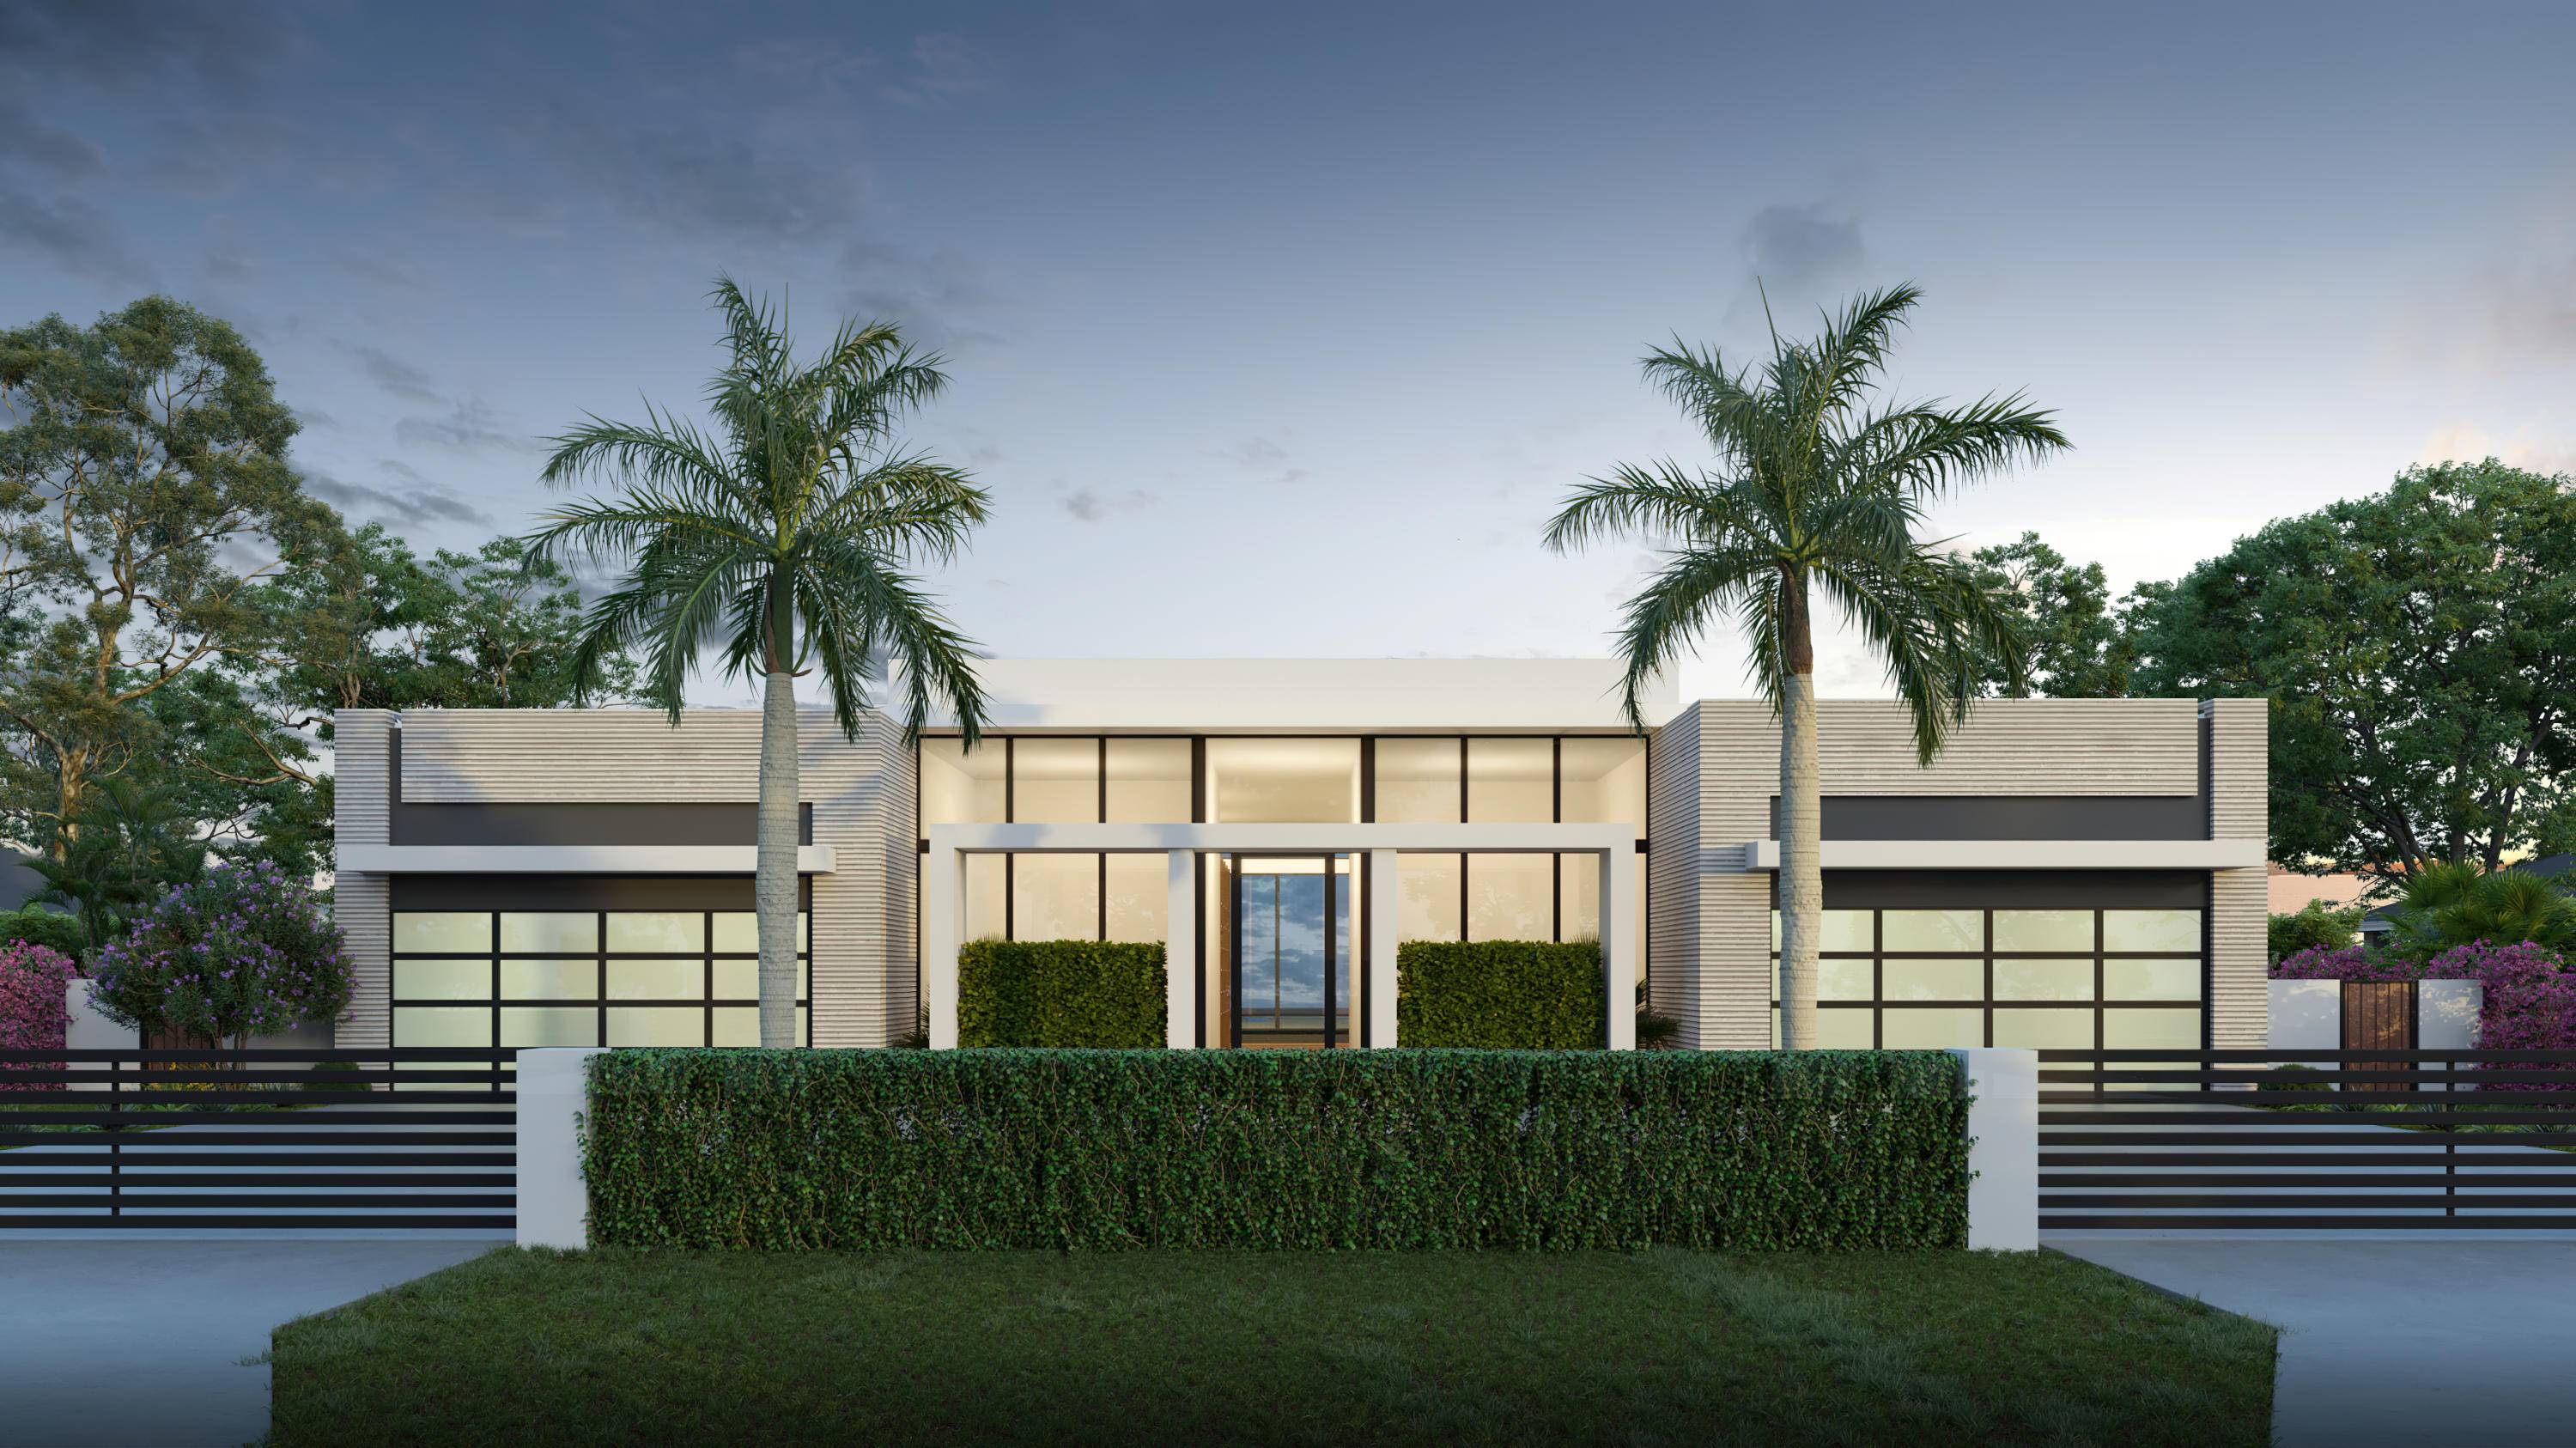 A masterpiece created by prestigious Primark Partners Marc Julian Homes, along with Award Winning Borrero Architecture and Michael Gray Interiors, this new Mid Century Modern Intracoastal estate with four bedrooms ...